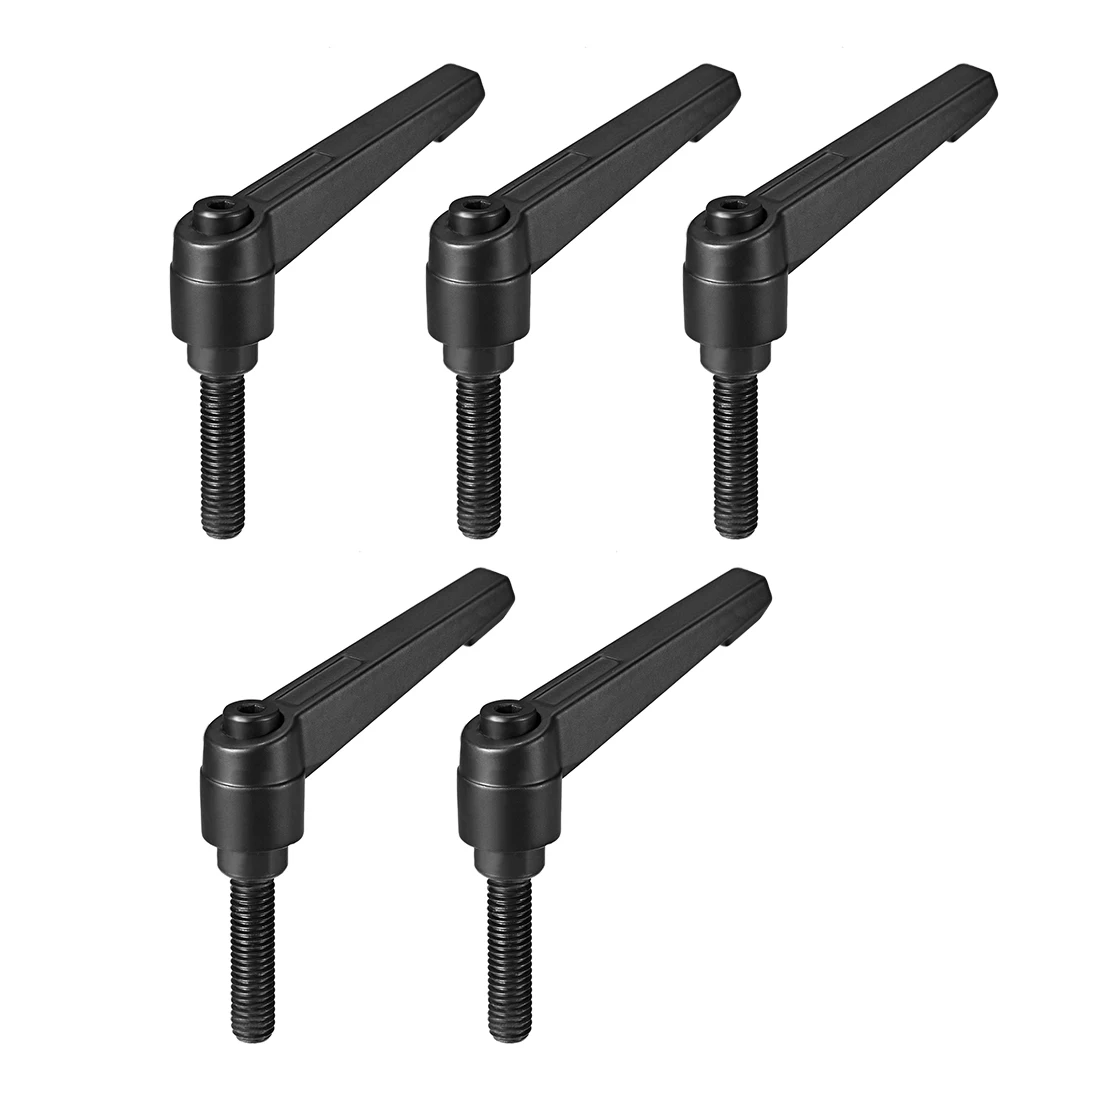 

Uxcell M8 x 32mm Handle Adjustable Clamping Lever Thread Push Button Ratchet Male Threaded Stud 5Pcs